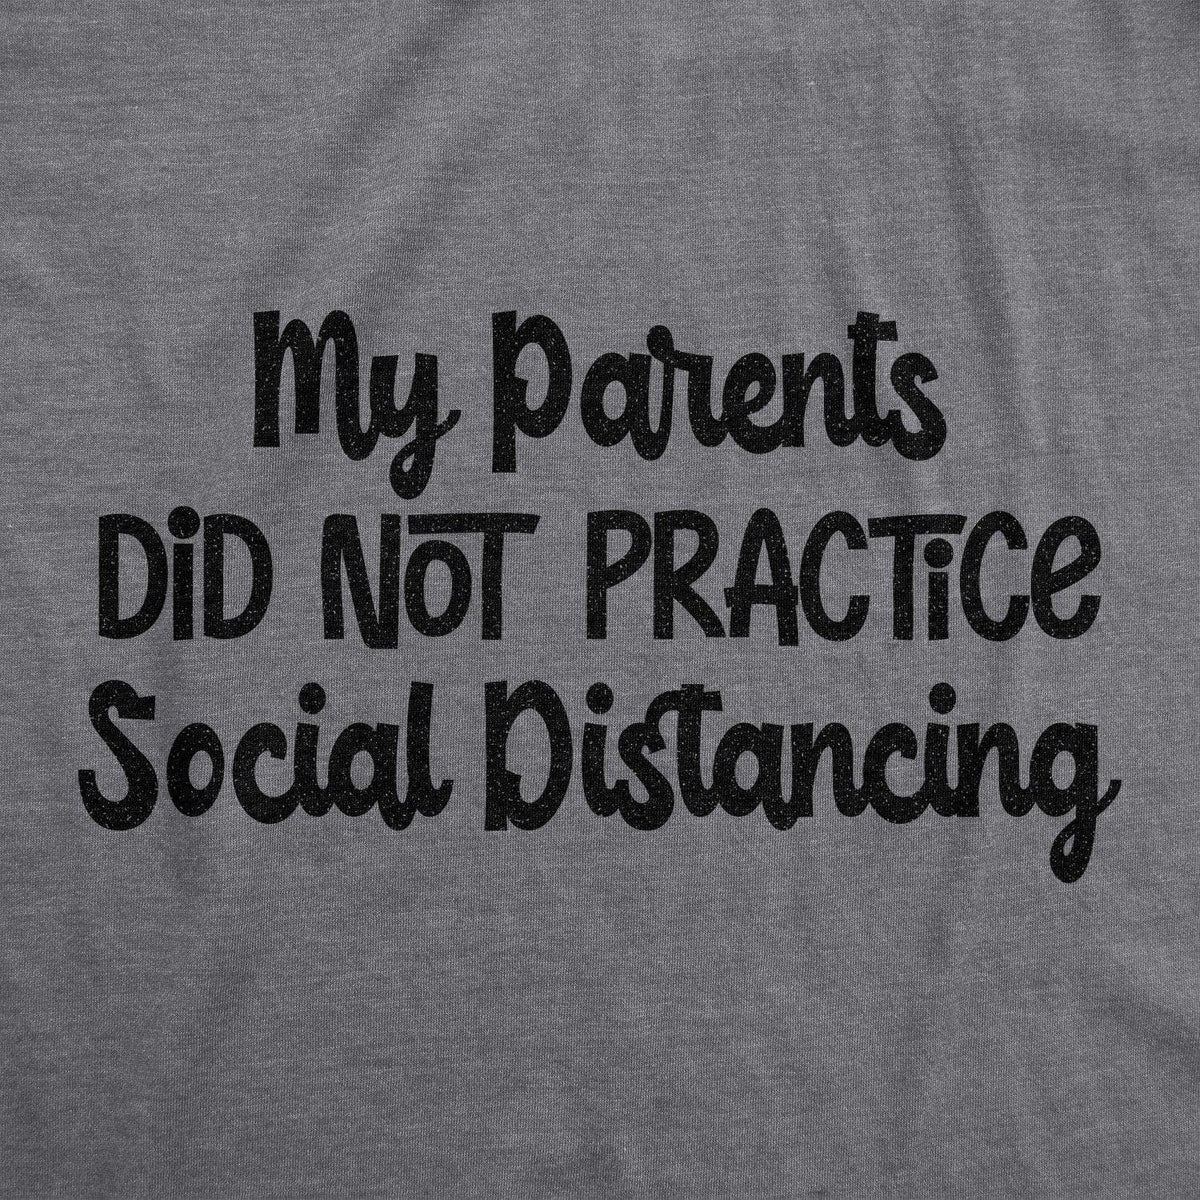 My Parents Did Not Practice Social Distancing Baby Bodysuit - Crazy Dog T-Shirts